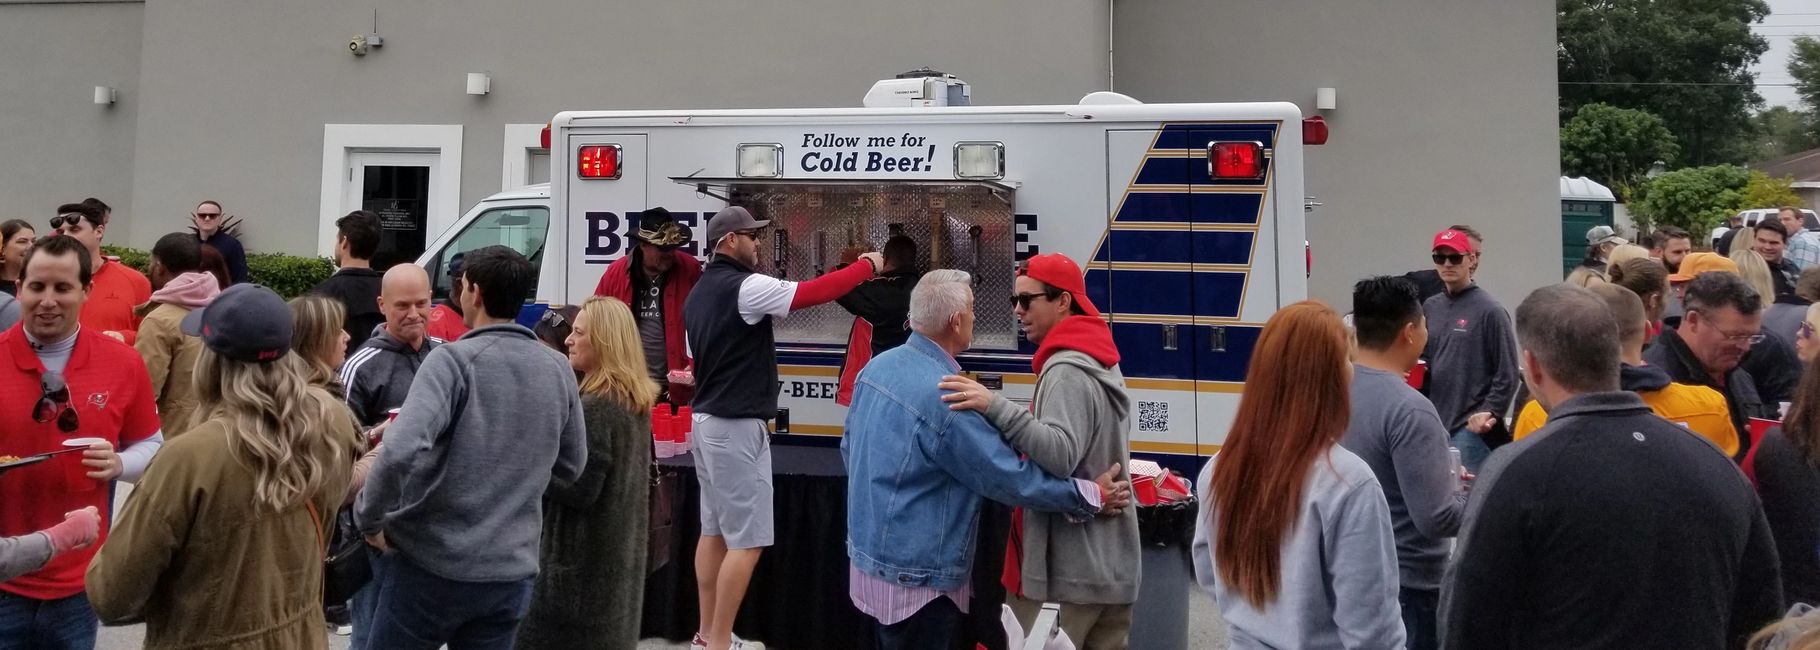 Beer Rescue serving draft beer at local event.